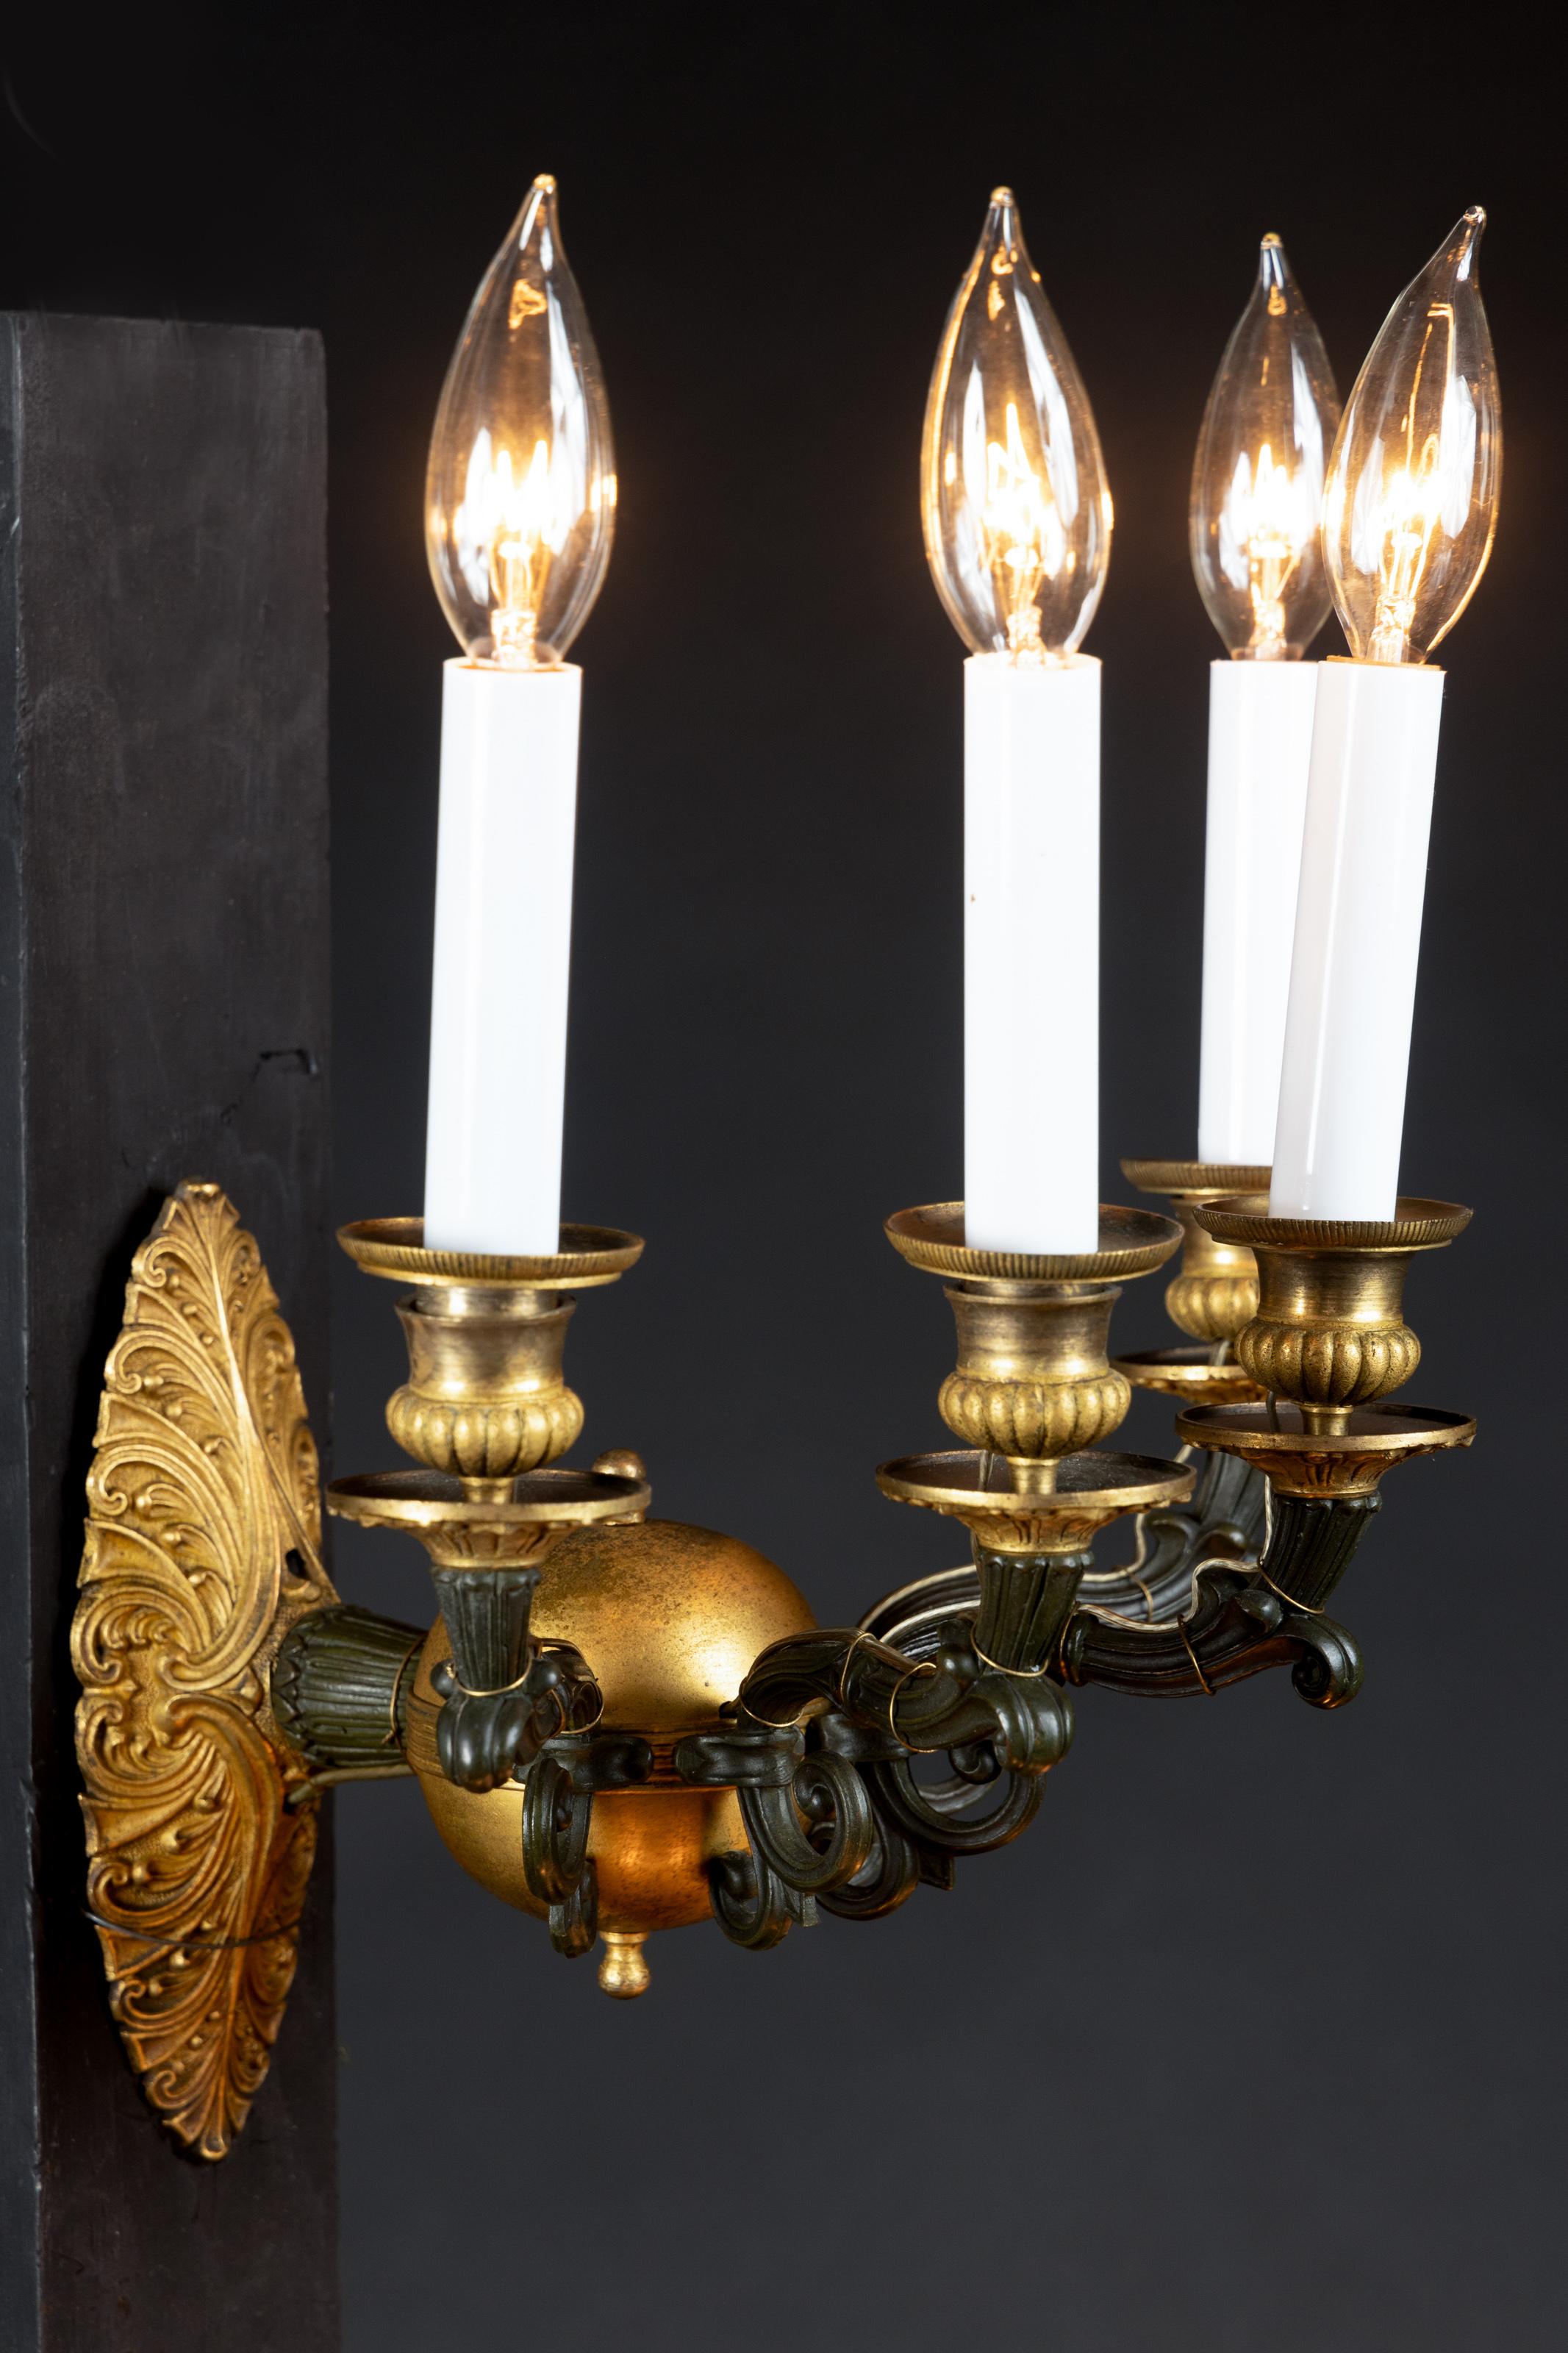 Exquisite French Mid-19th Century Empire Bronze and Patinated Bronze Sconces For Sale 1